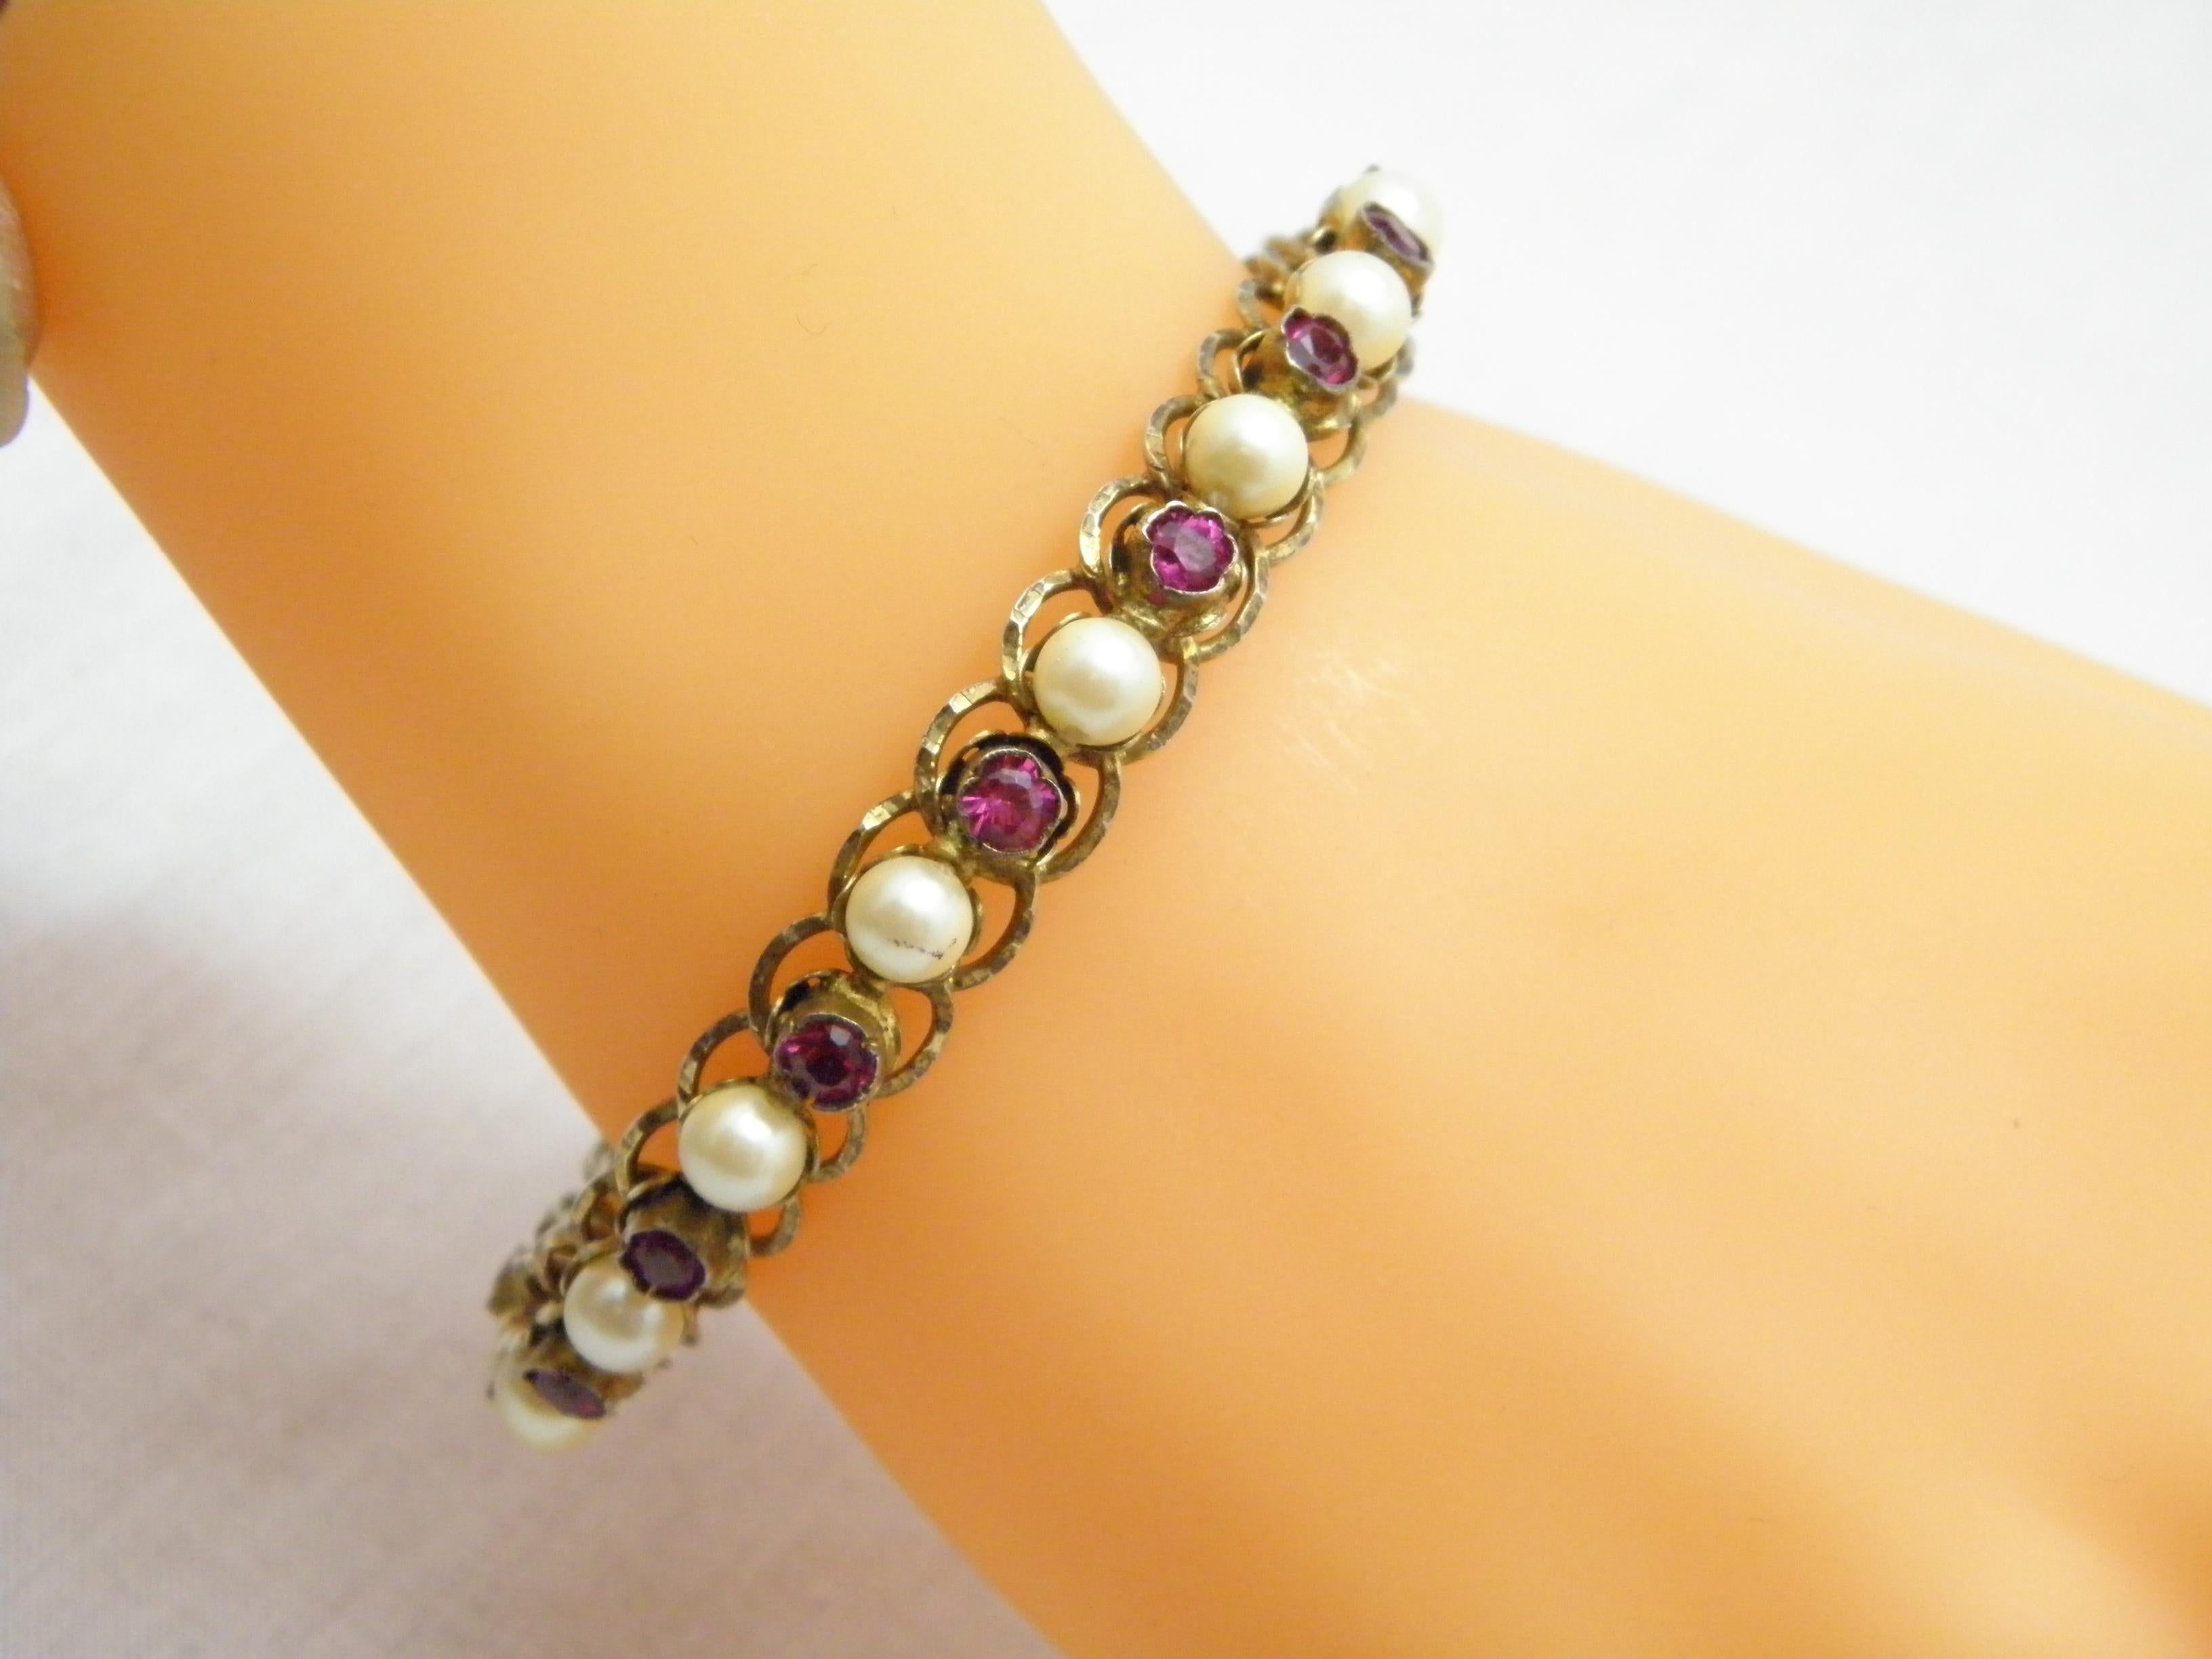 Antique 9ct Gold 'Rolled' Ruby Pearl Paste Hinged Bracelet Bangle 375 Purity For Sale 2